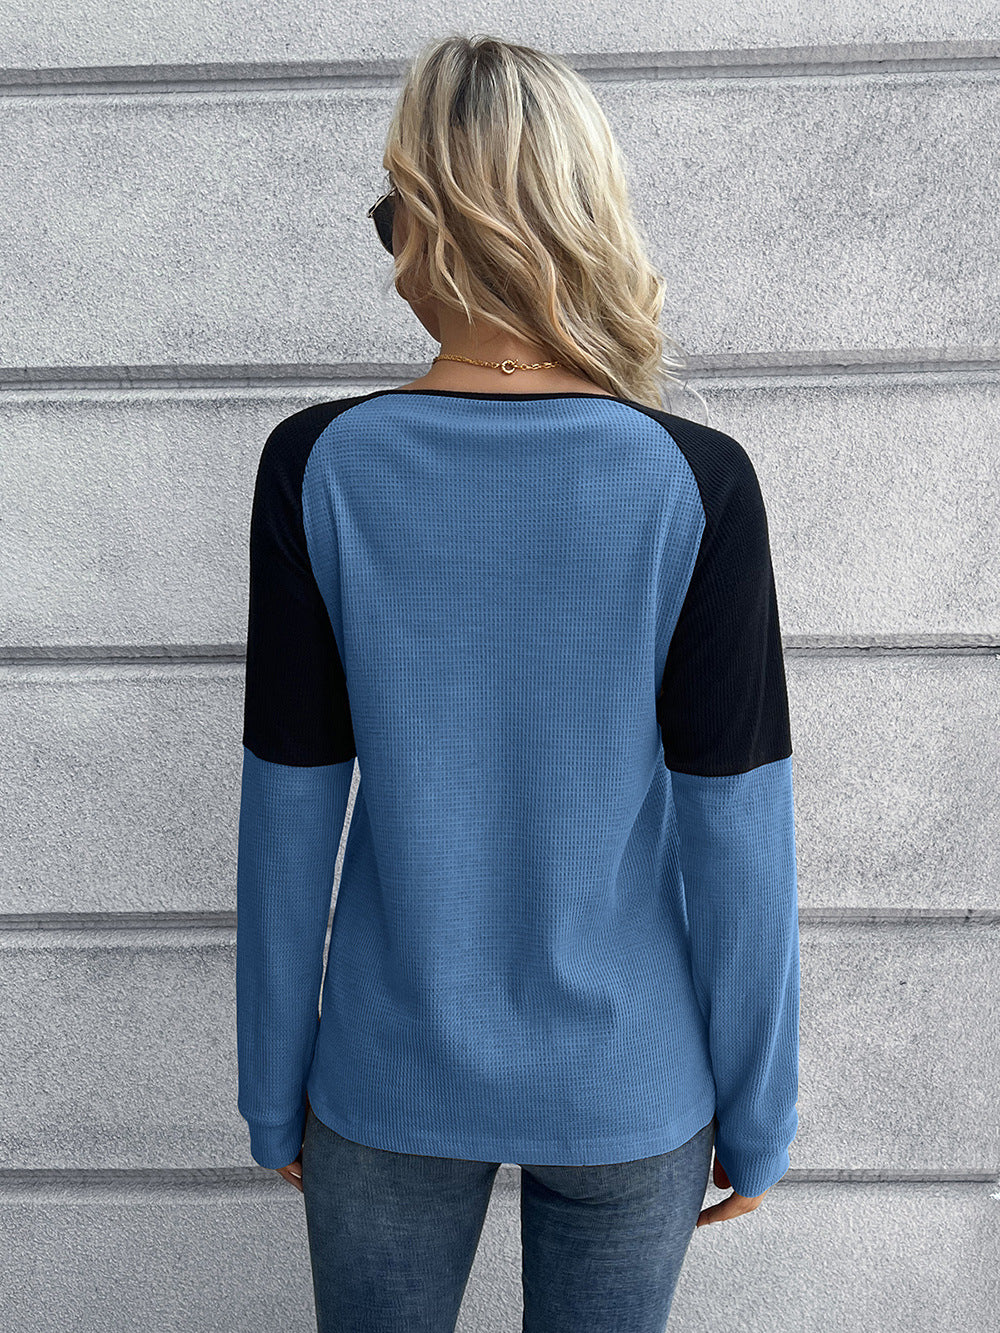 SOSPRING Contrast Buttoned Round Neck Raglan Sleeve Top